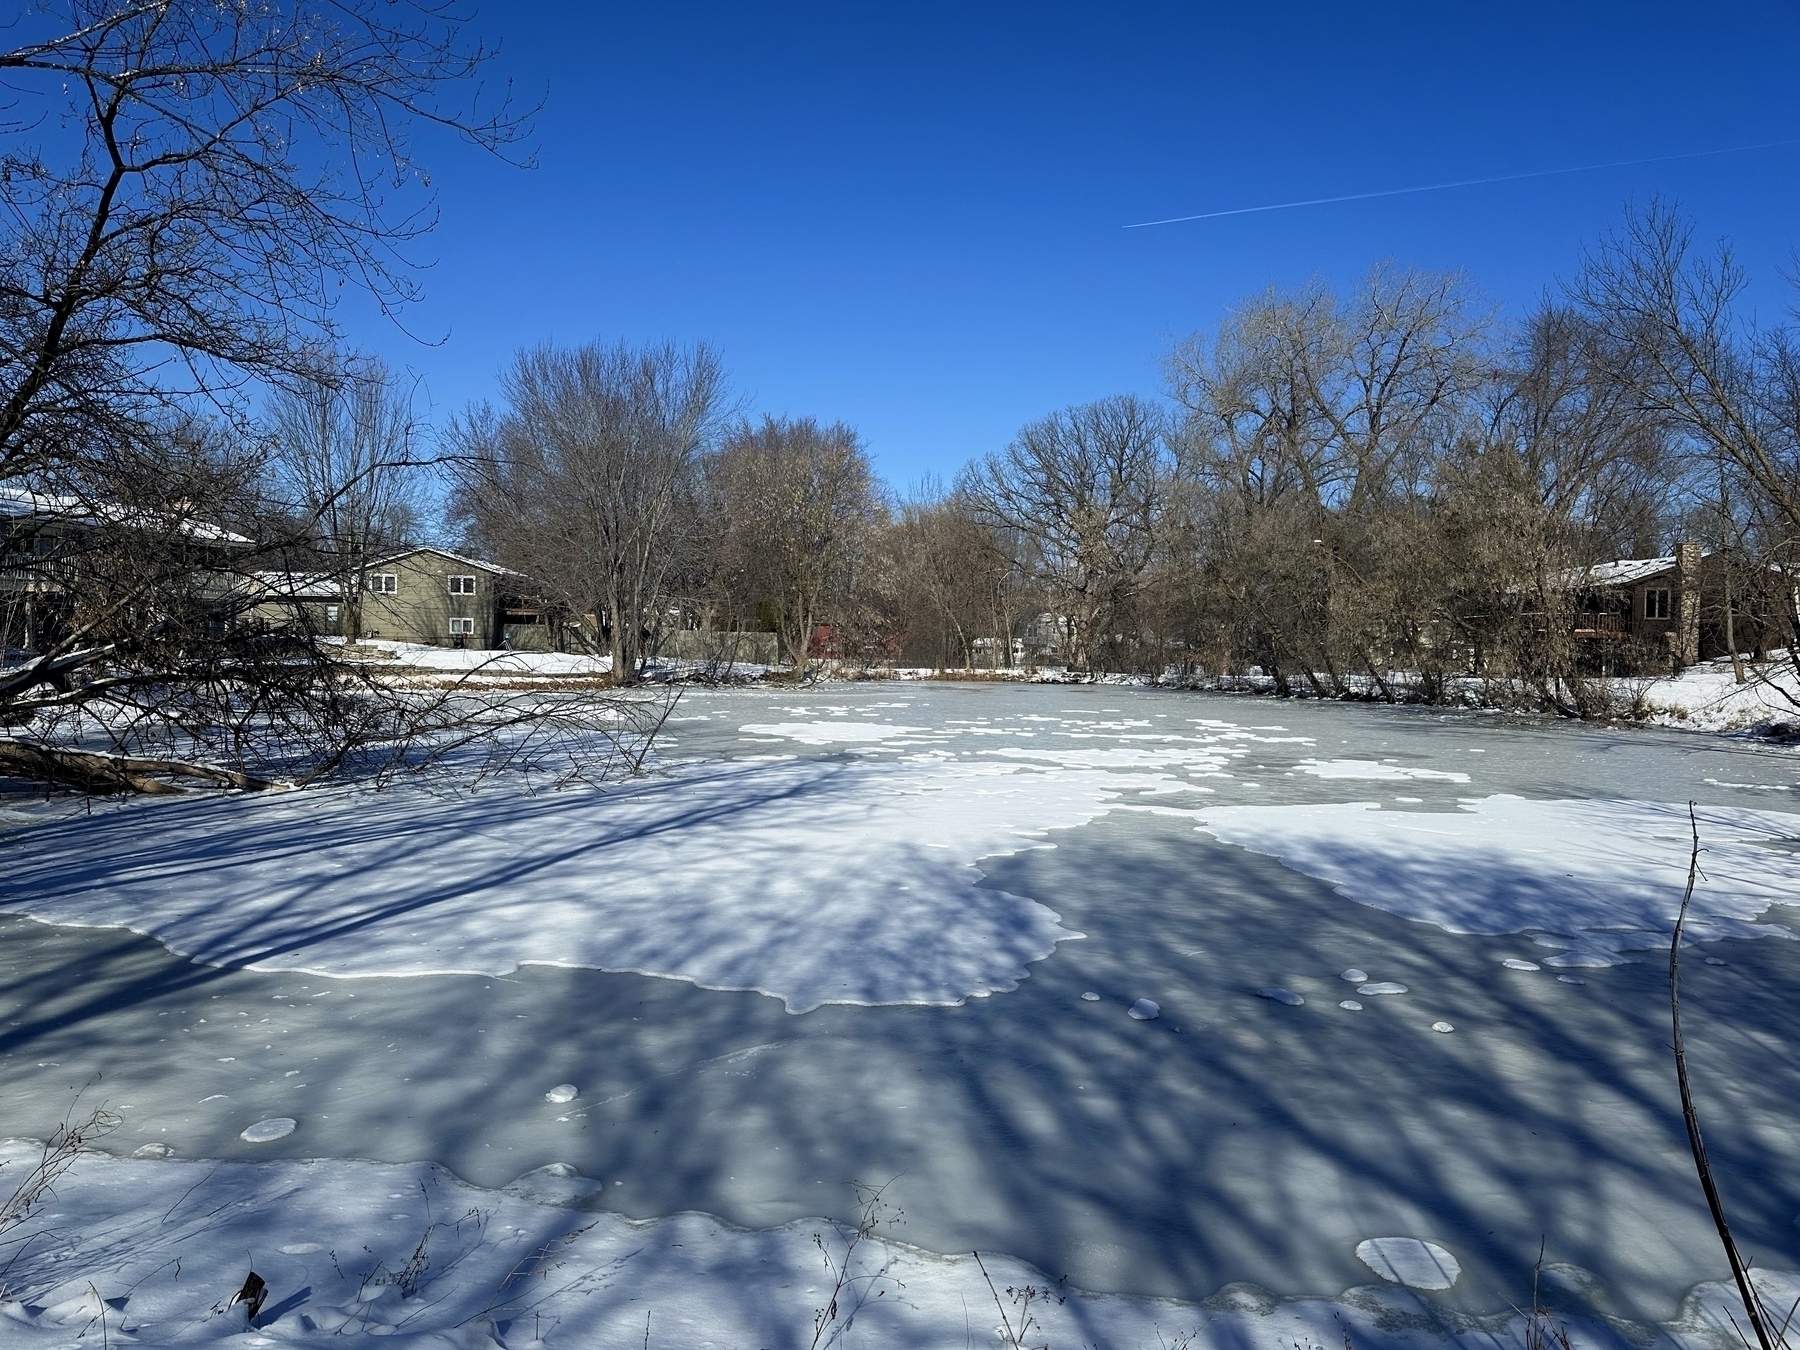 A frozen pond with snow cover sits amidst leafless trees under a clear blue sky, with houses in the background.